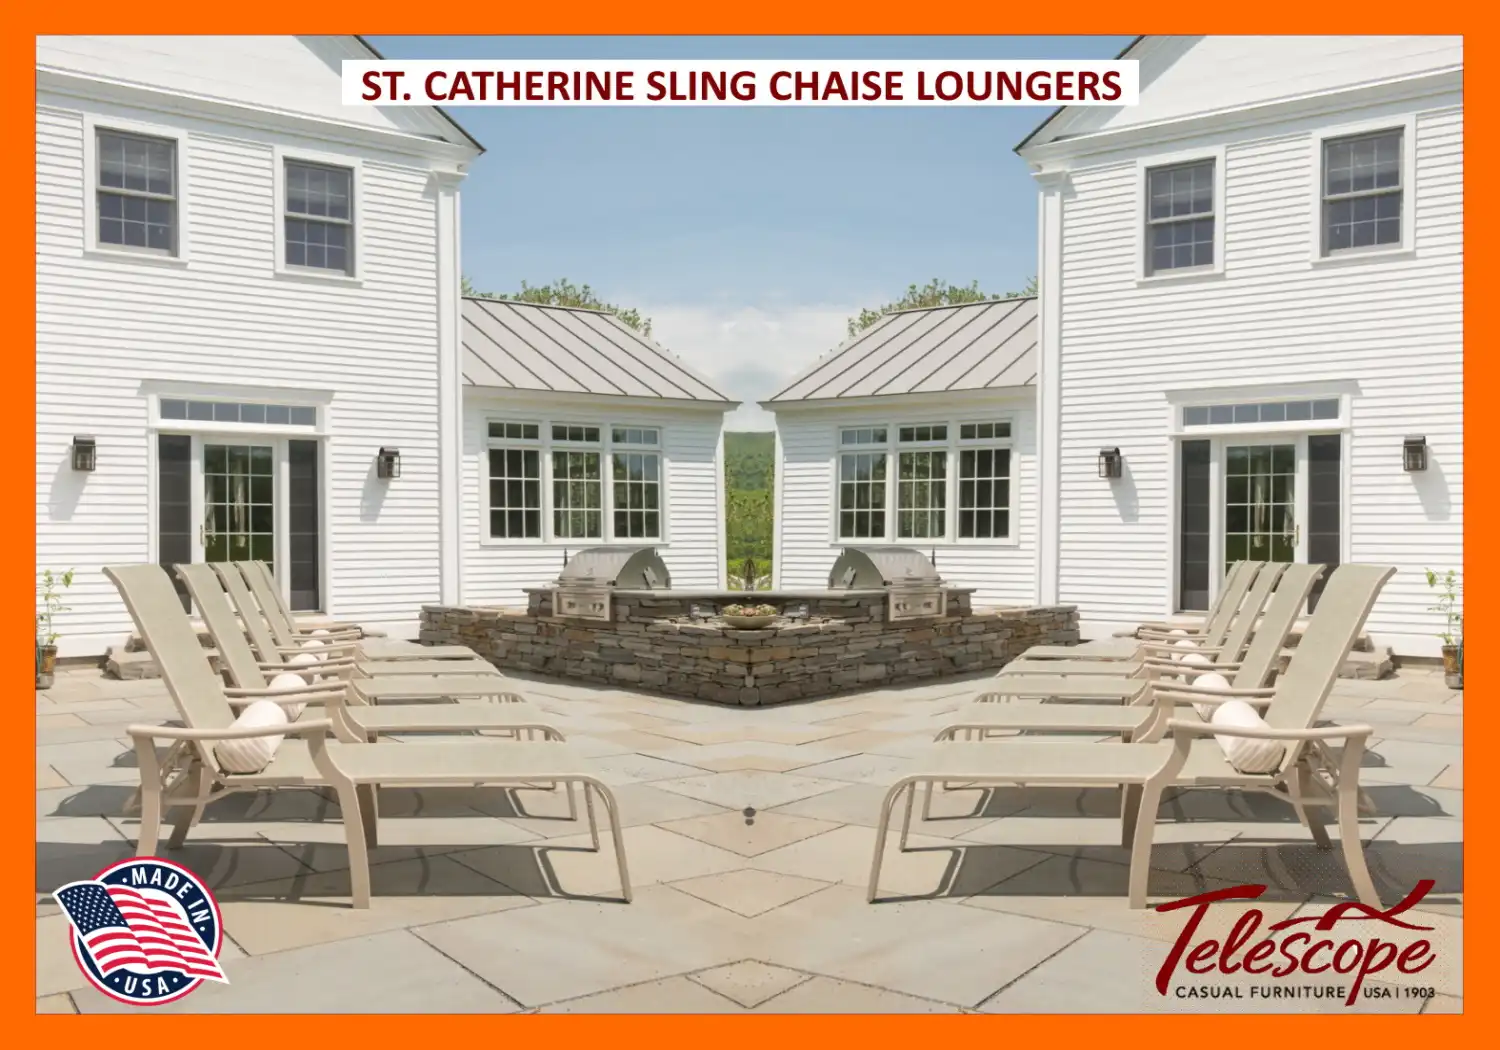 ST. CATHERINE SLING CHAISE LOUNGERS